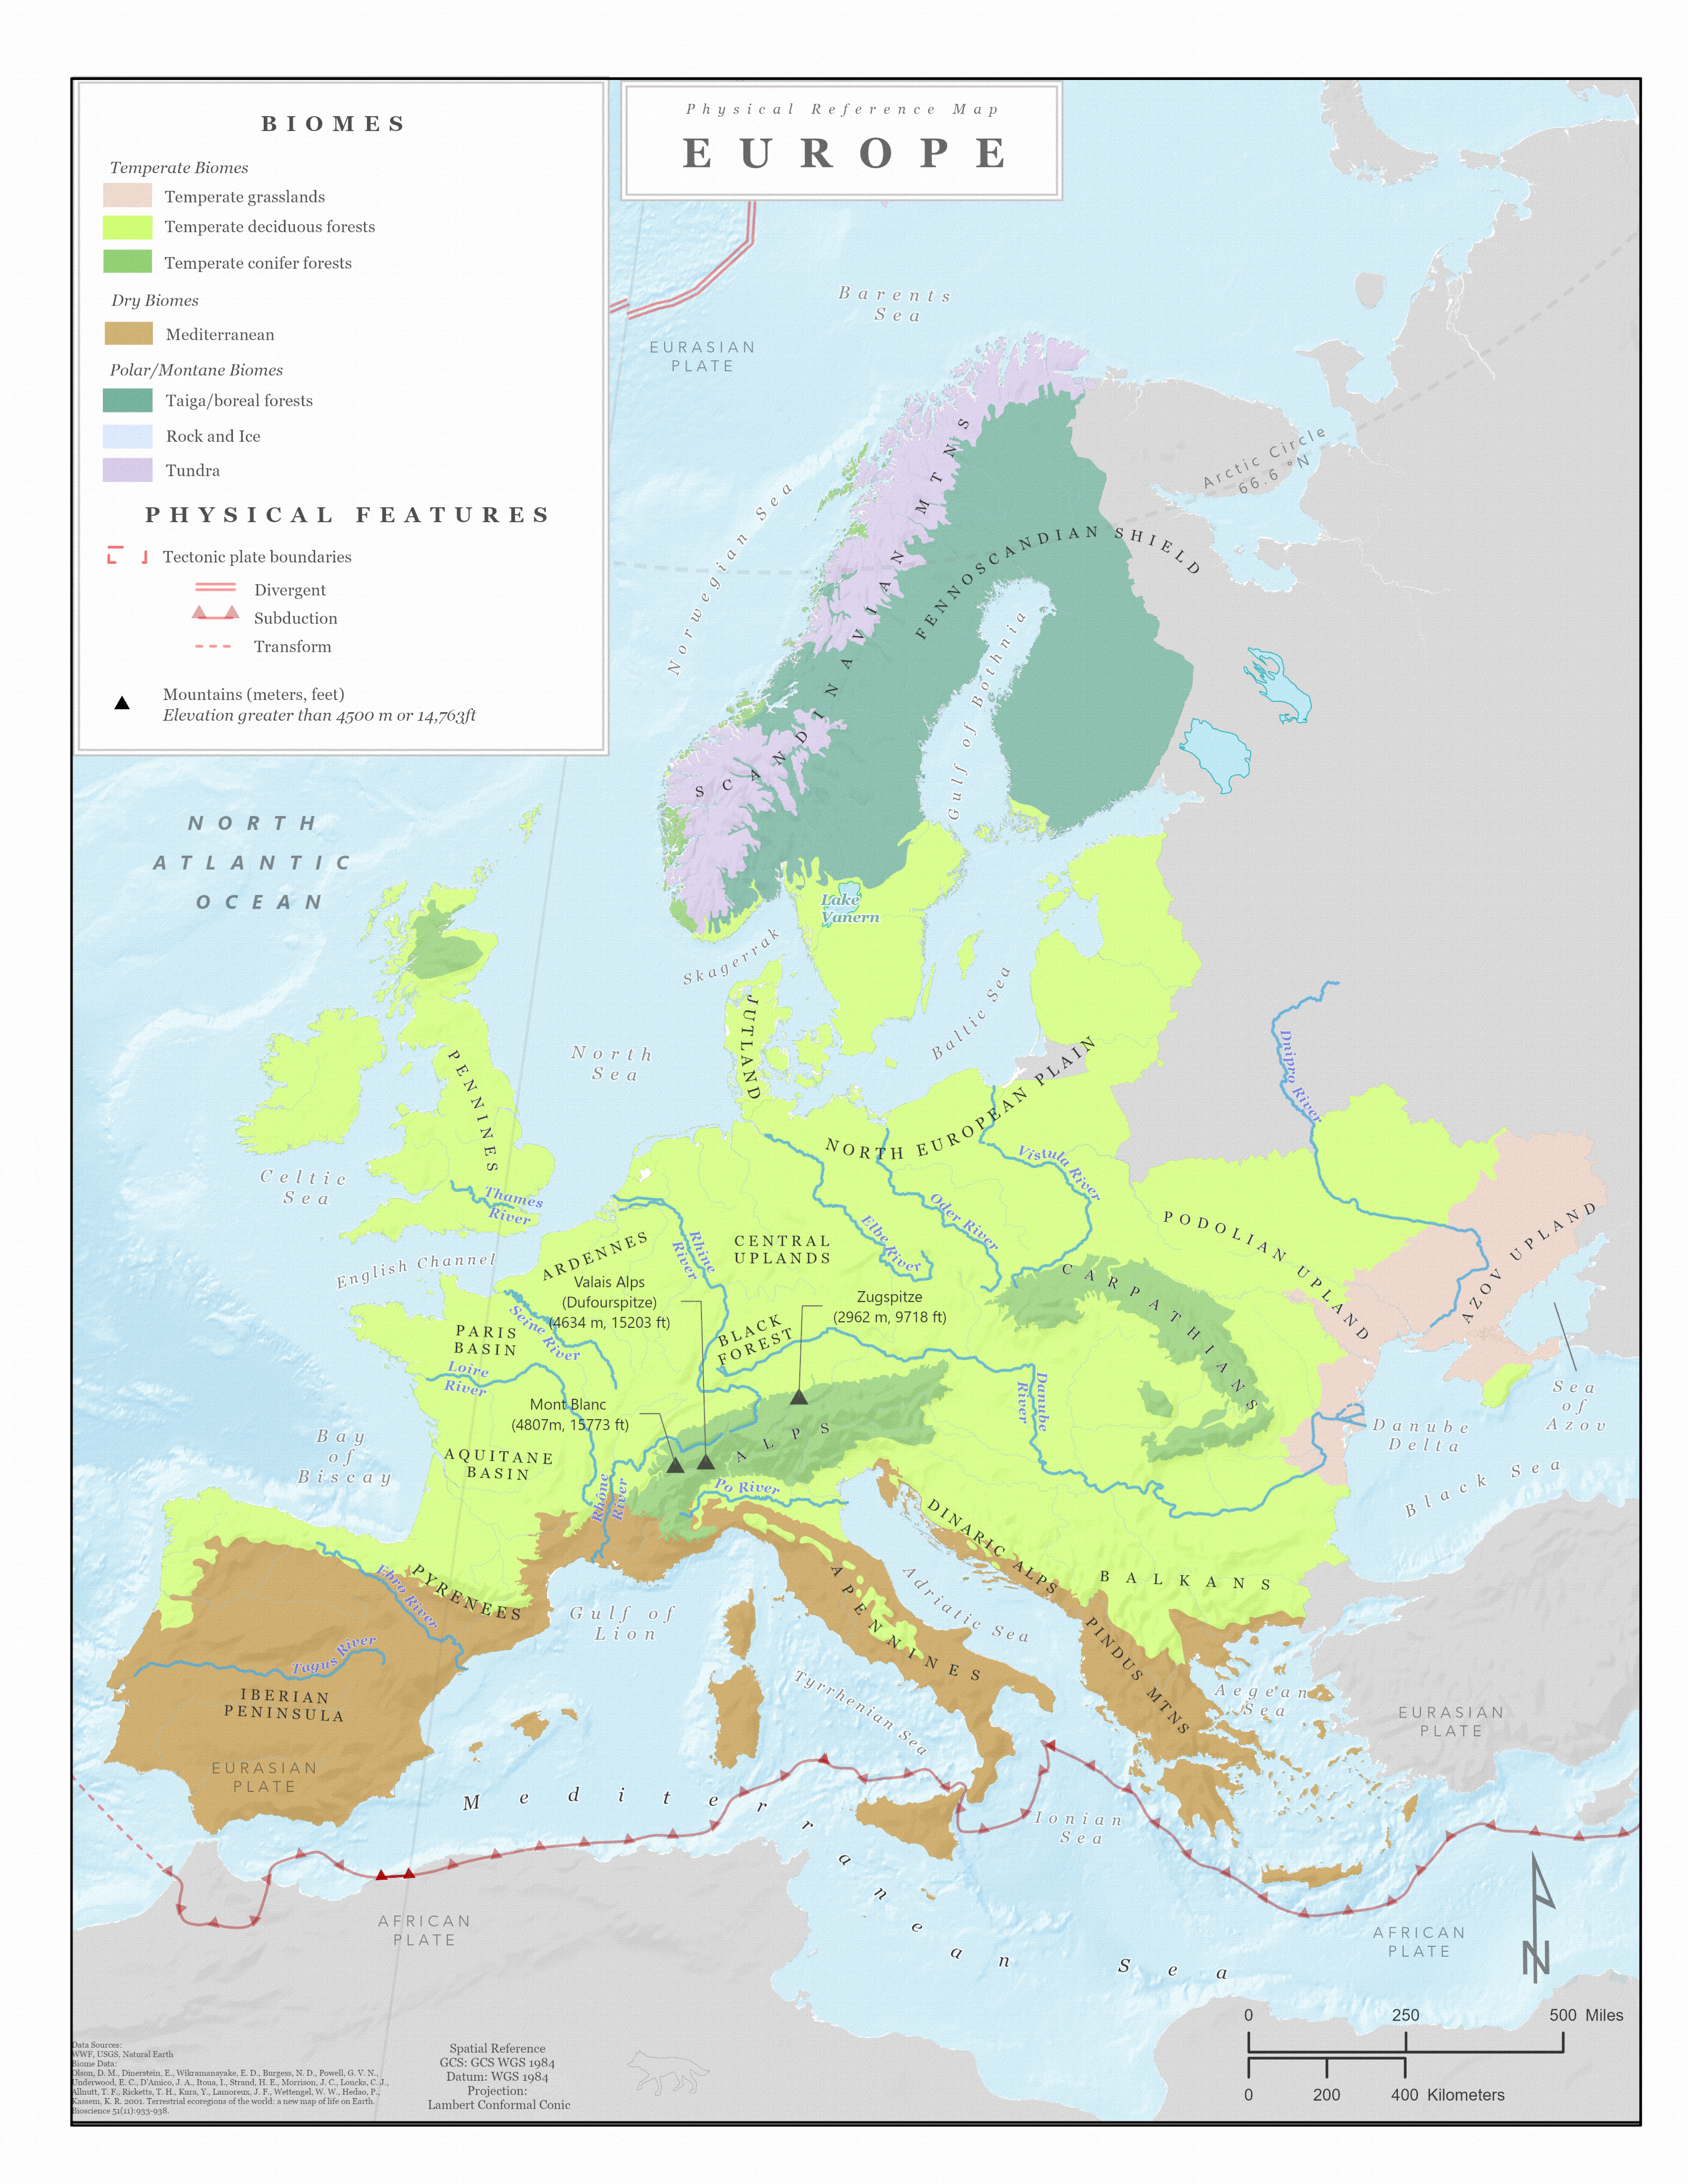 Biome and physical features map of Europe